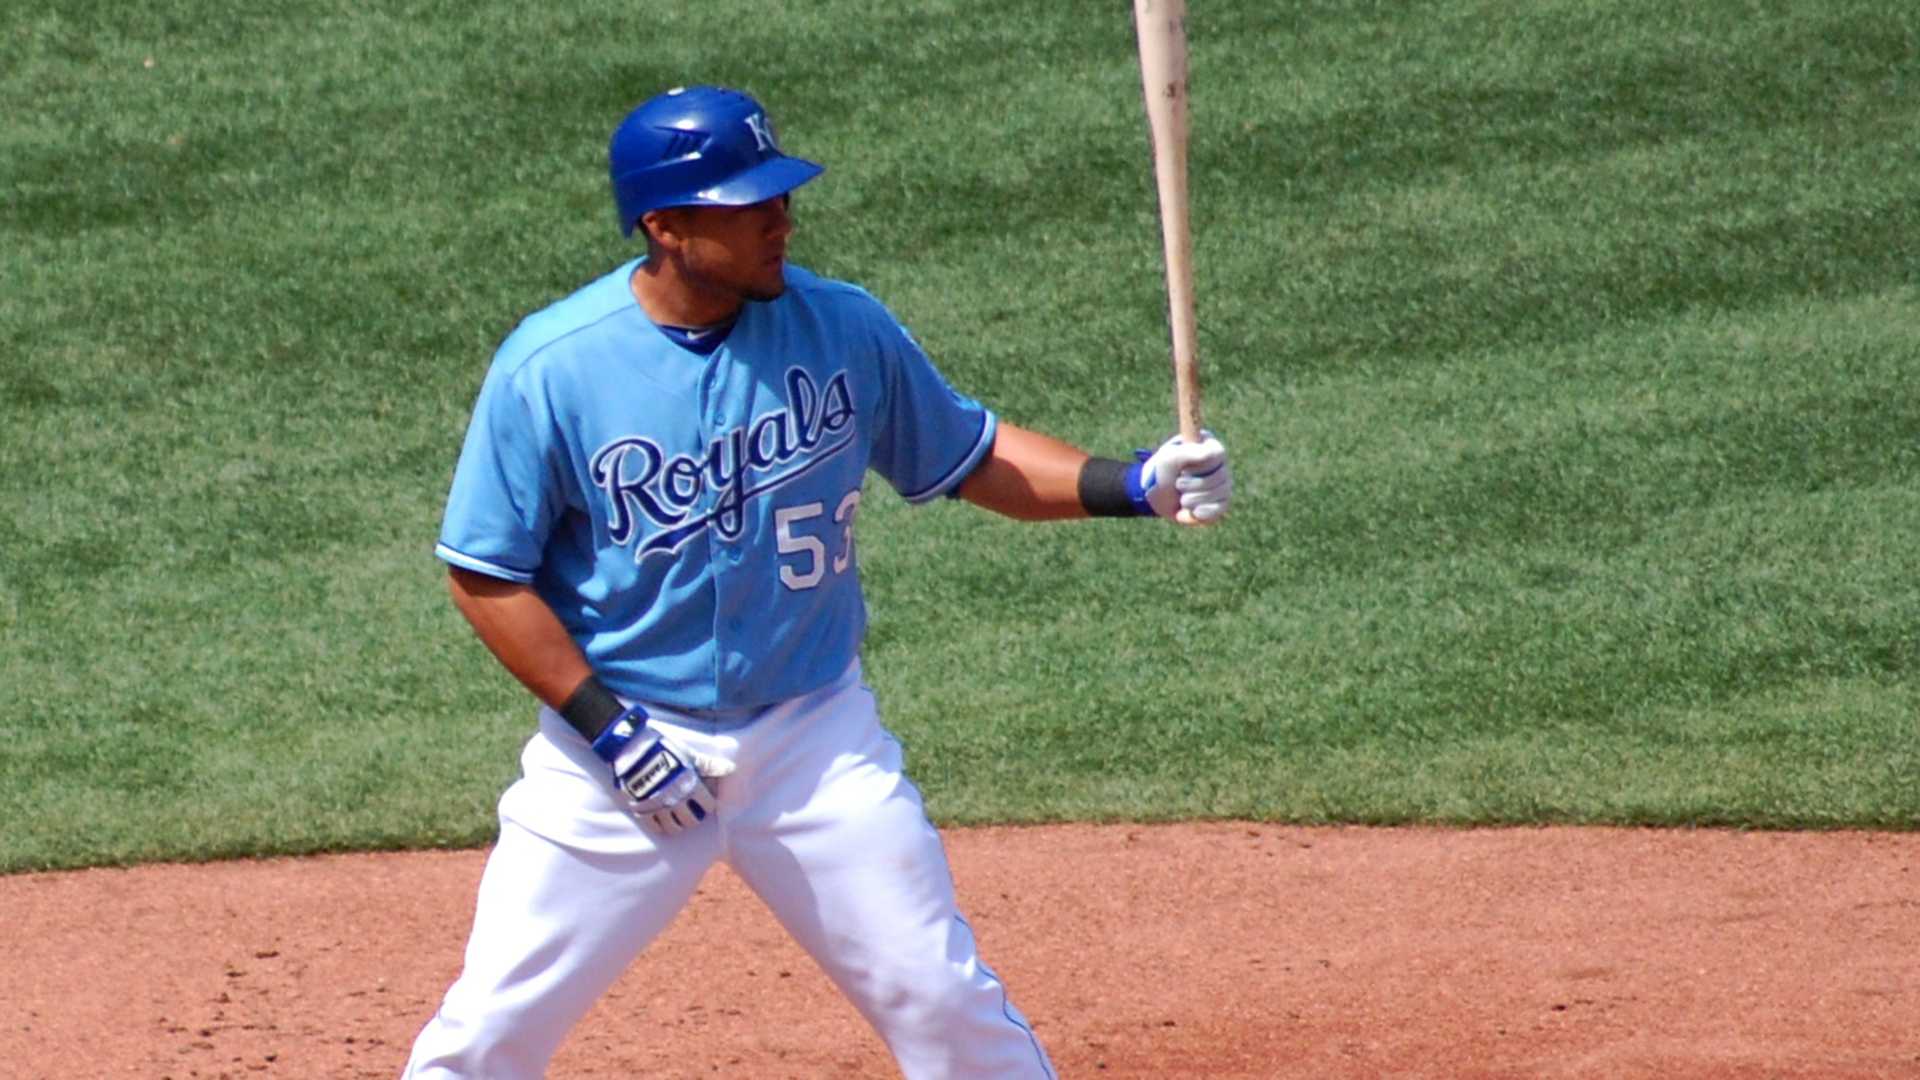 Royals trade two minor leaguers to the White Sox for Melky Cabrera and cash considerations